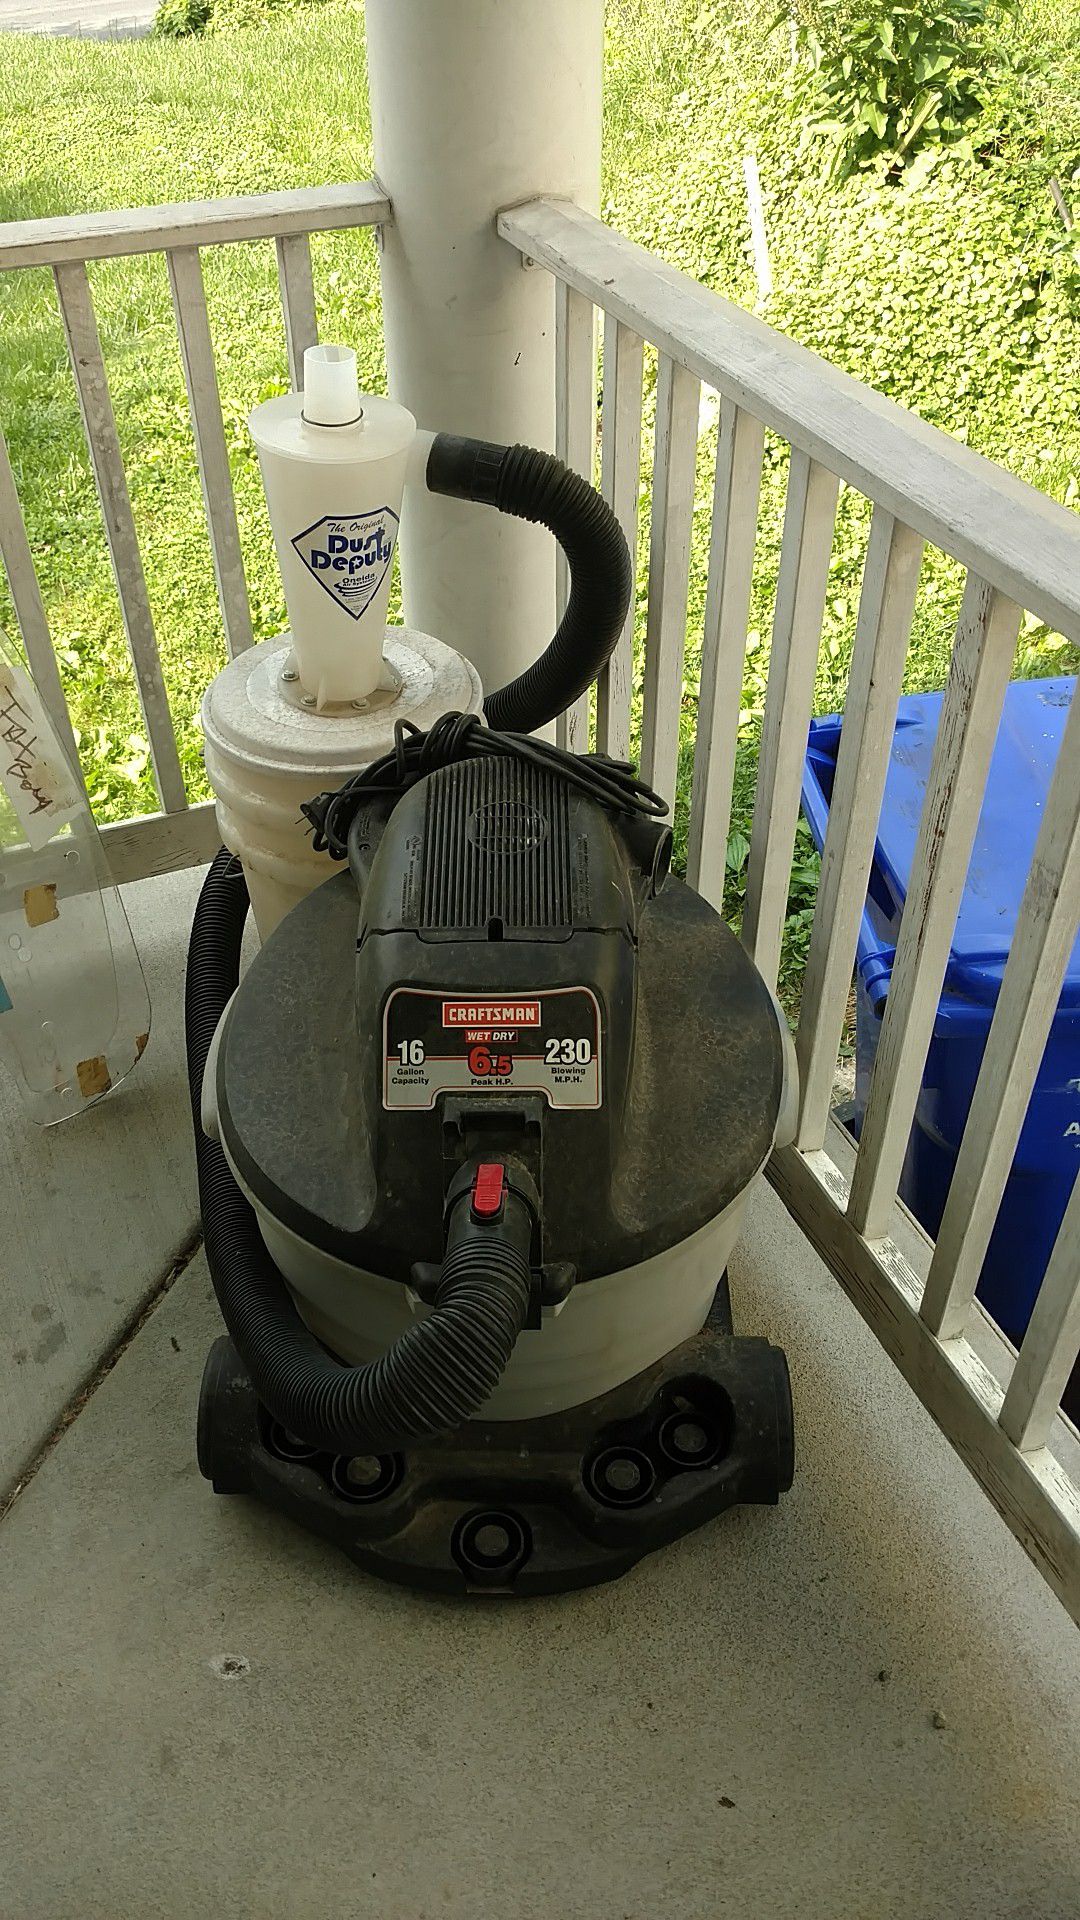 Shop-Vac with Dust Deputy attached Google it it works